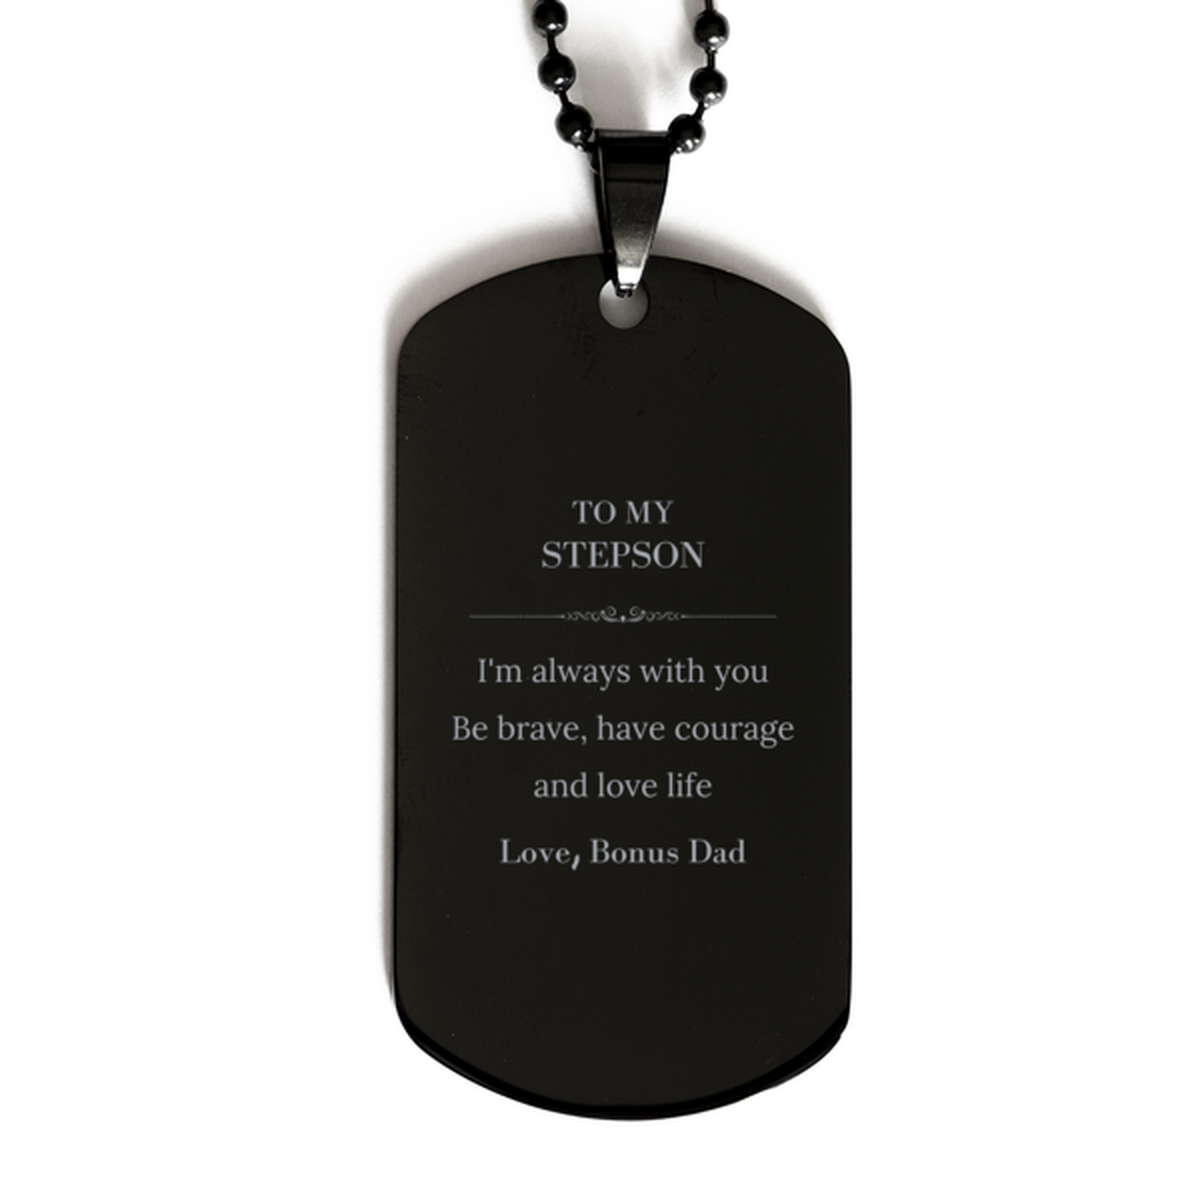 To My Stepson Gifts from Bonus Dad, Unique Black Dog Tag Inspirational Christmas Birthday Graduation Gifts for Stepson I'm always with you. Be brave, have courage and love life. Love, Bonus Dad